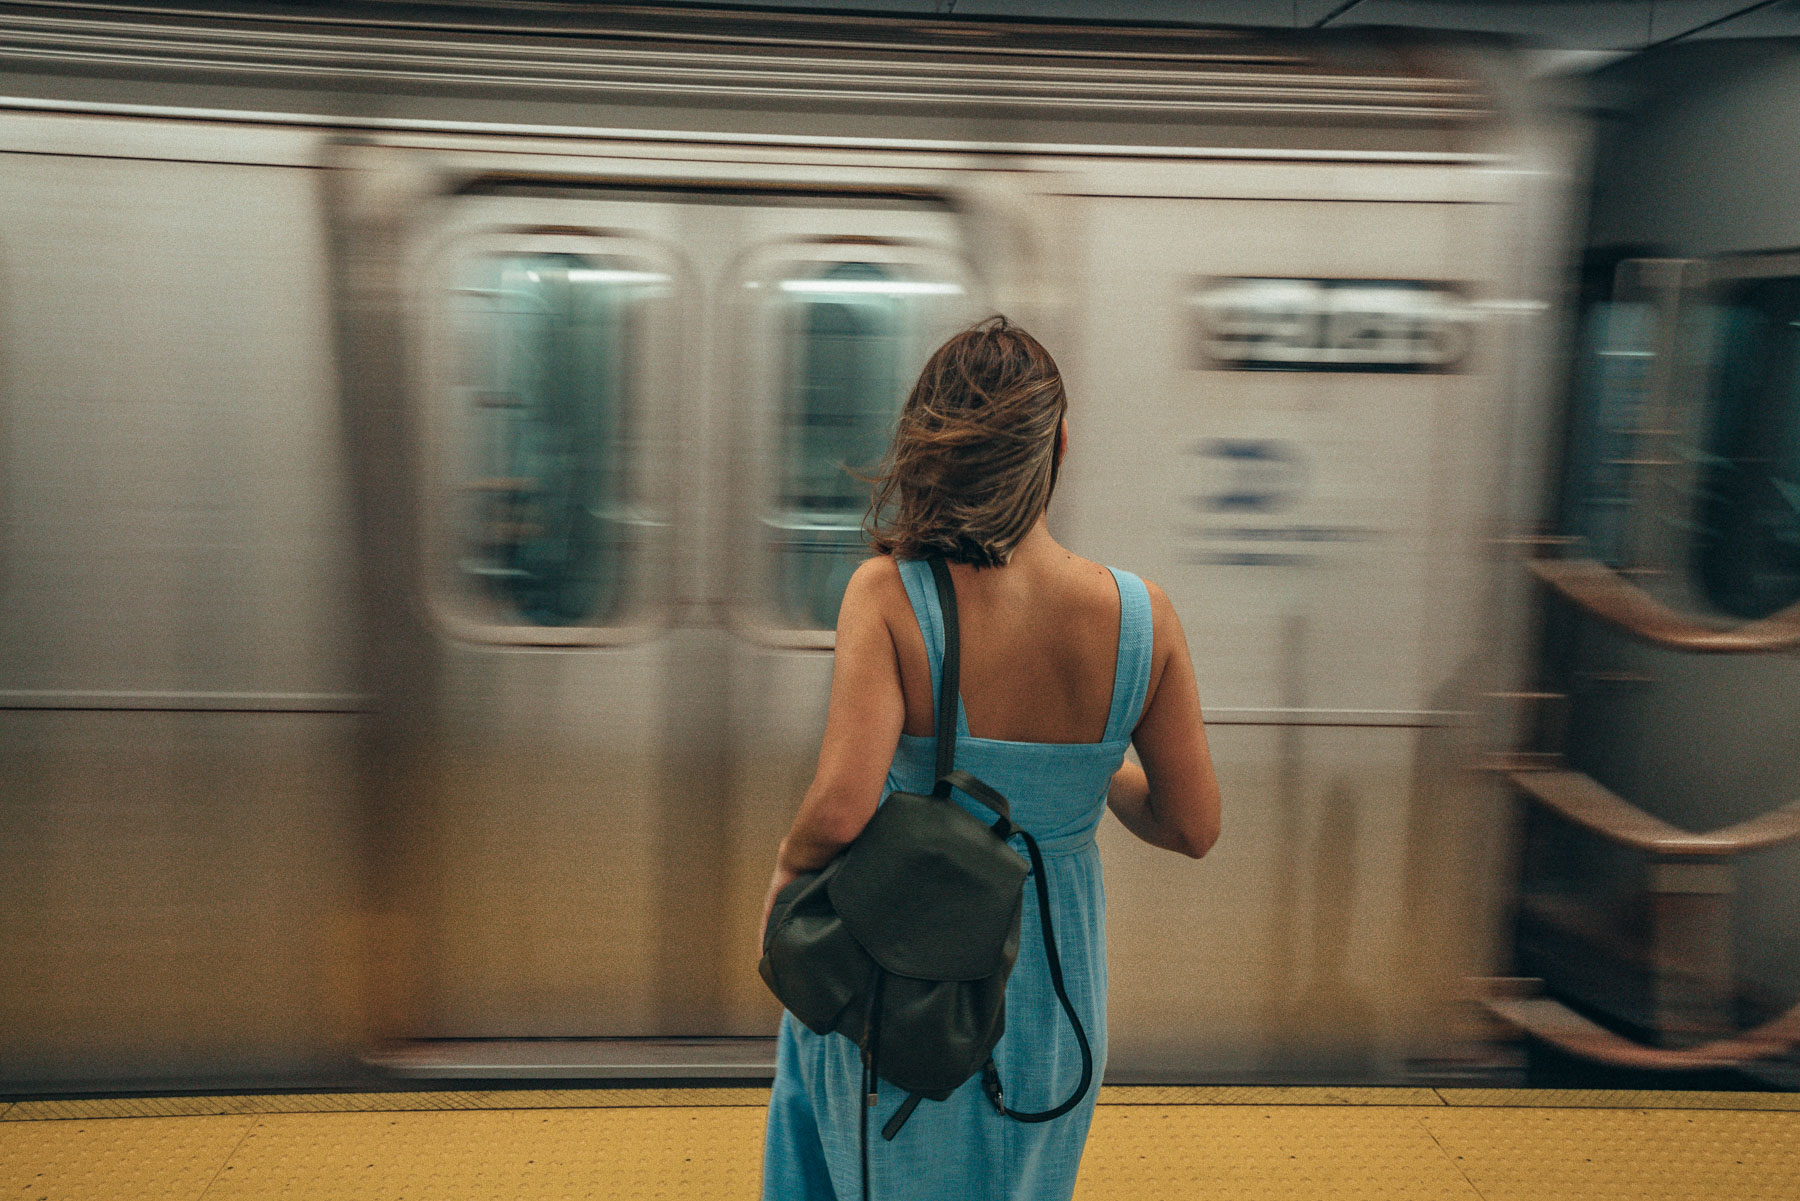 Ride the Subway, visiting New York City on a budget, staying safe in NYC